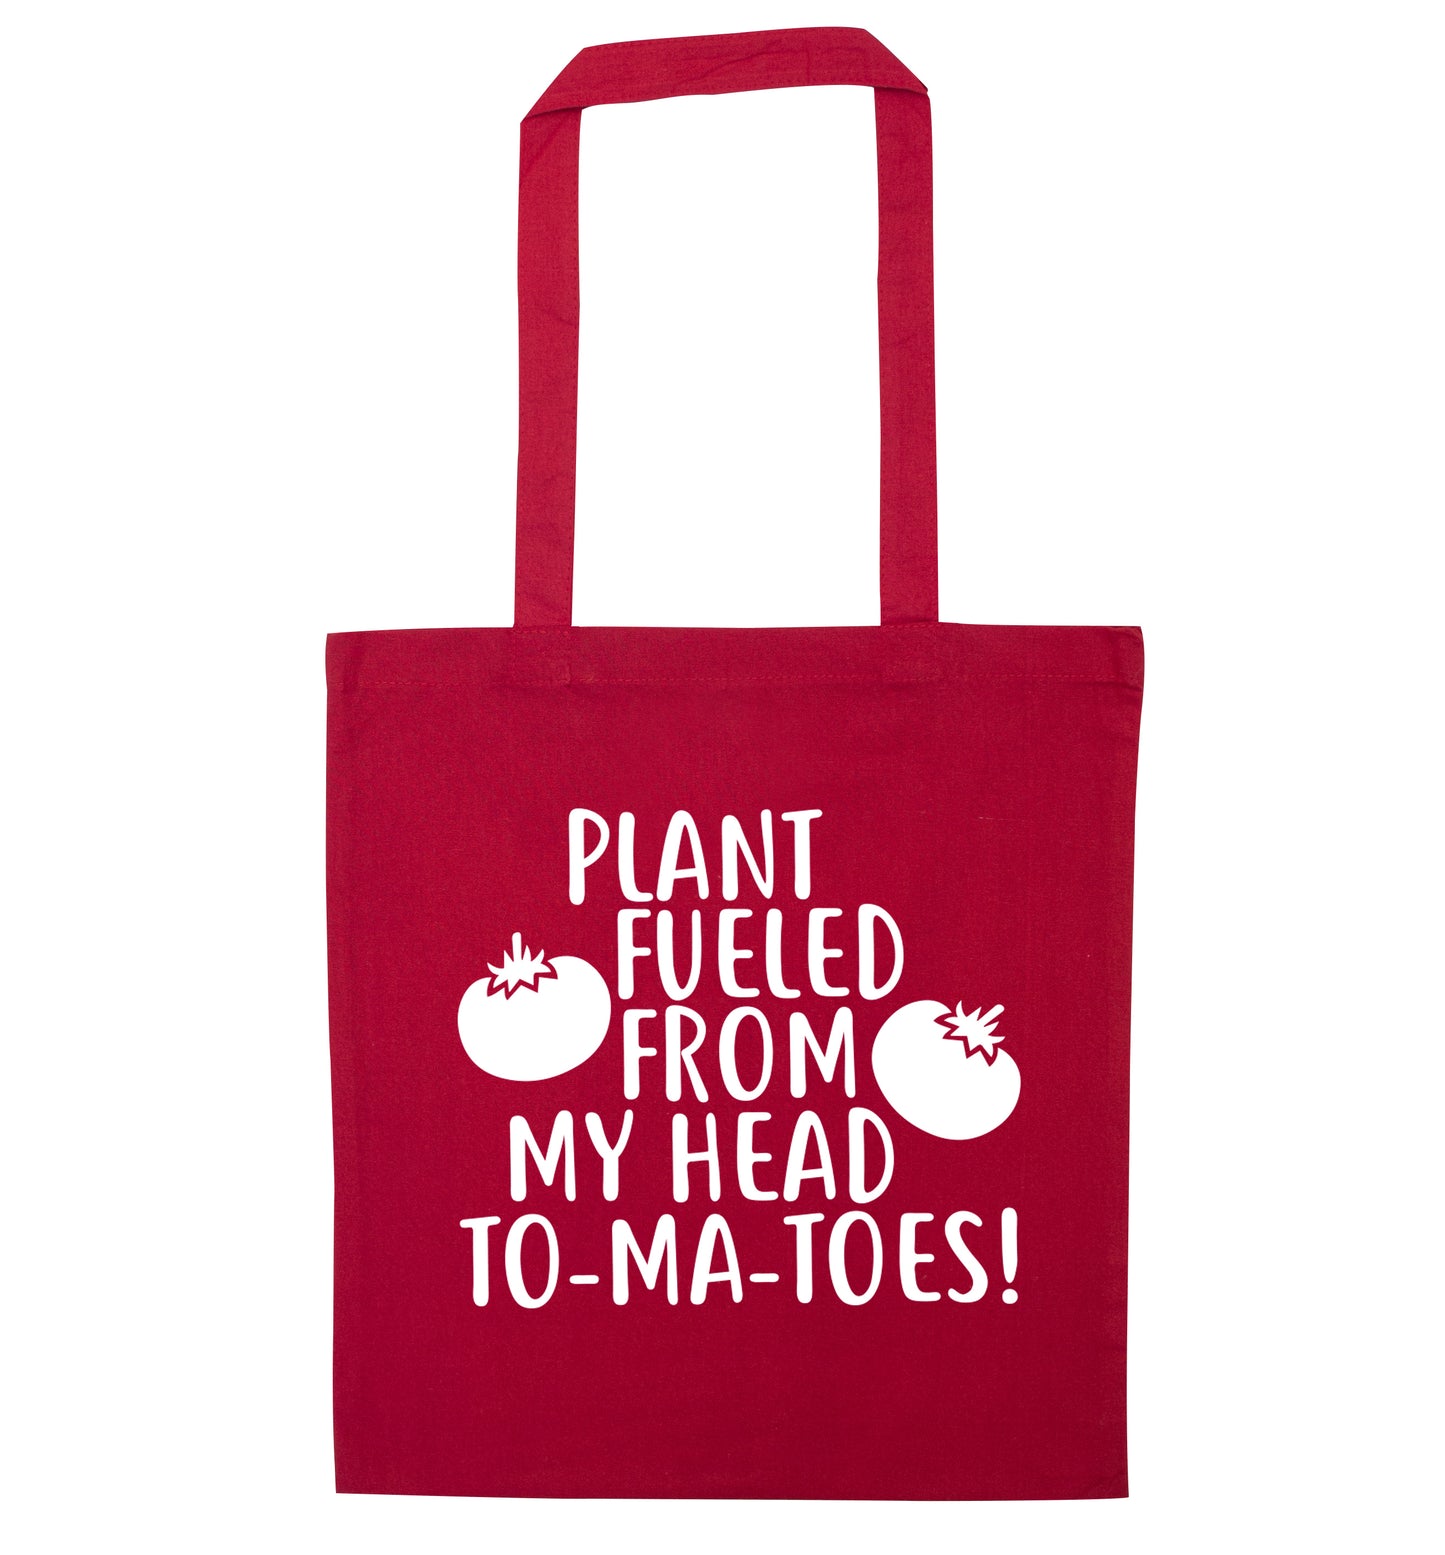 Plant fueled from my head to-ma-toes red tote bag